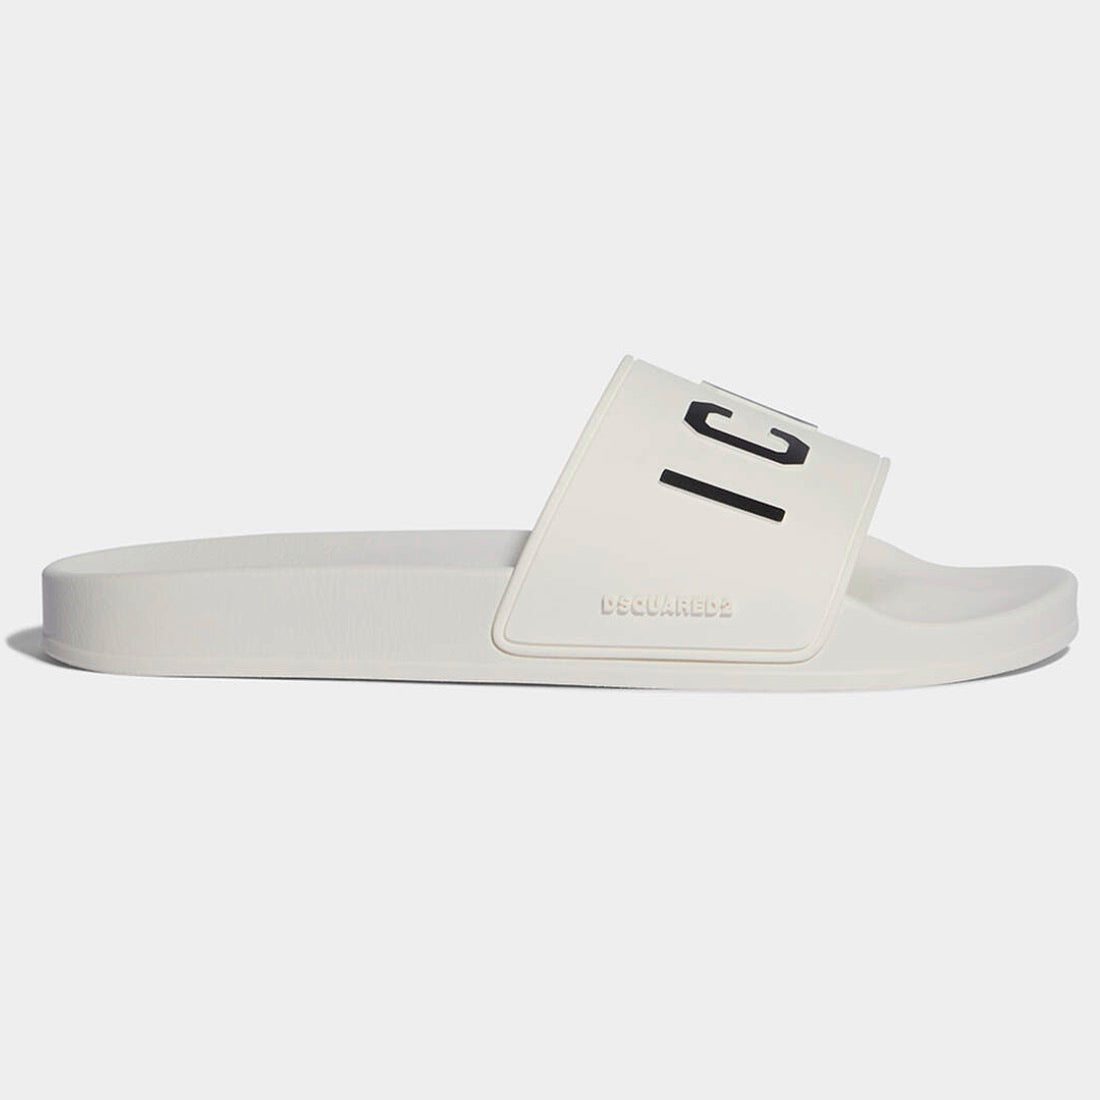 Step into luxury with these DSQUARED2 Icon Slides. The front features bold "ICON" lettering, while the sides boast 3D "DSQUARED2" lettering for a fashionable touch. The upper is made of 100% polyurethane, while the sole is crafted from 100% EVA for added comfort. Made in Italy, these slides are the epitome of style and quality.